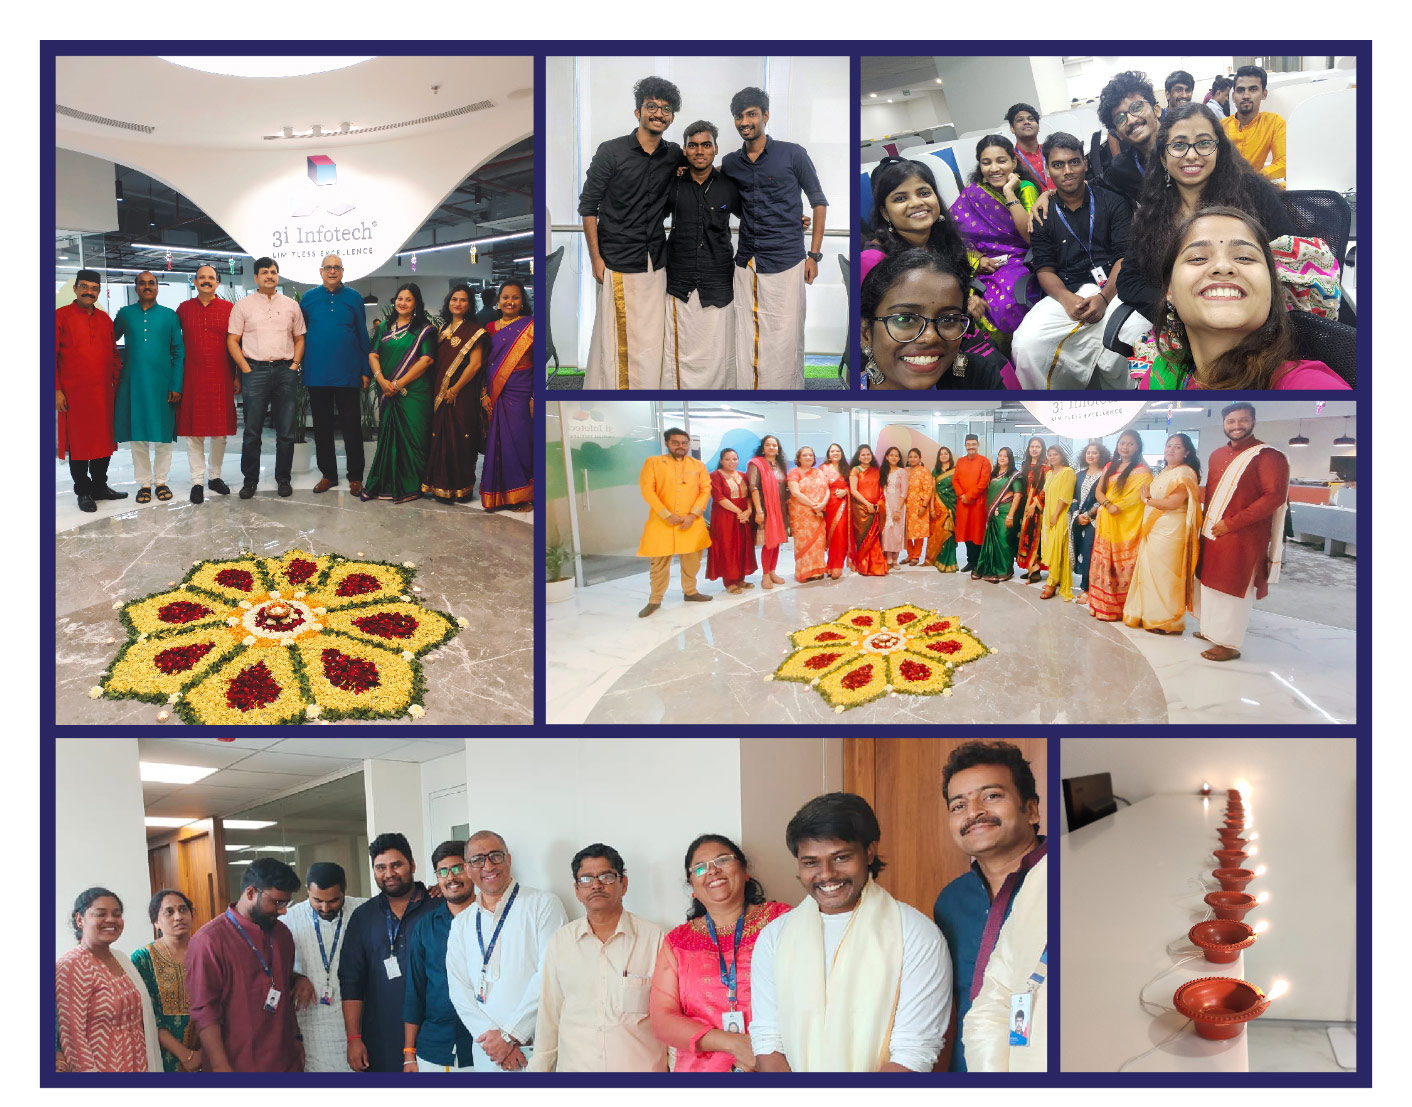 Celebrating the real spirit of Diwali: The warmth of friendships!